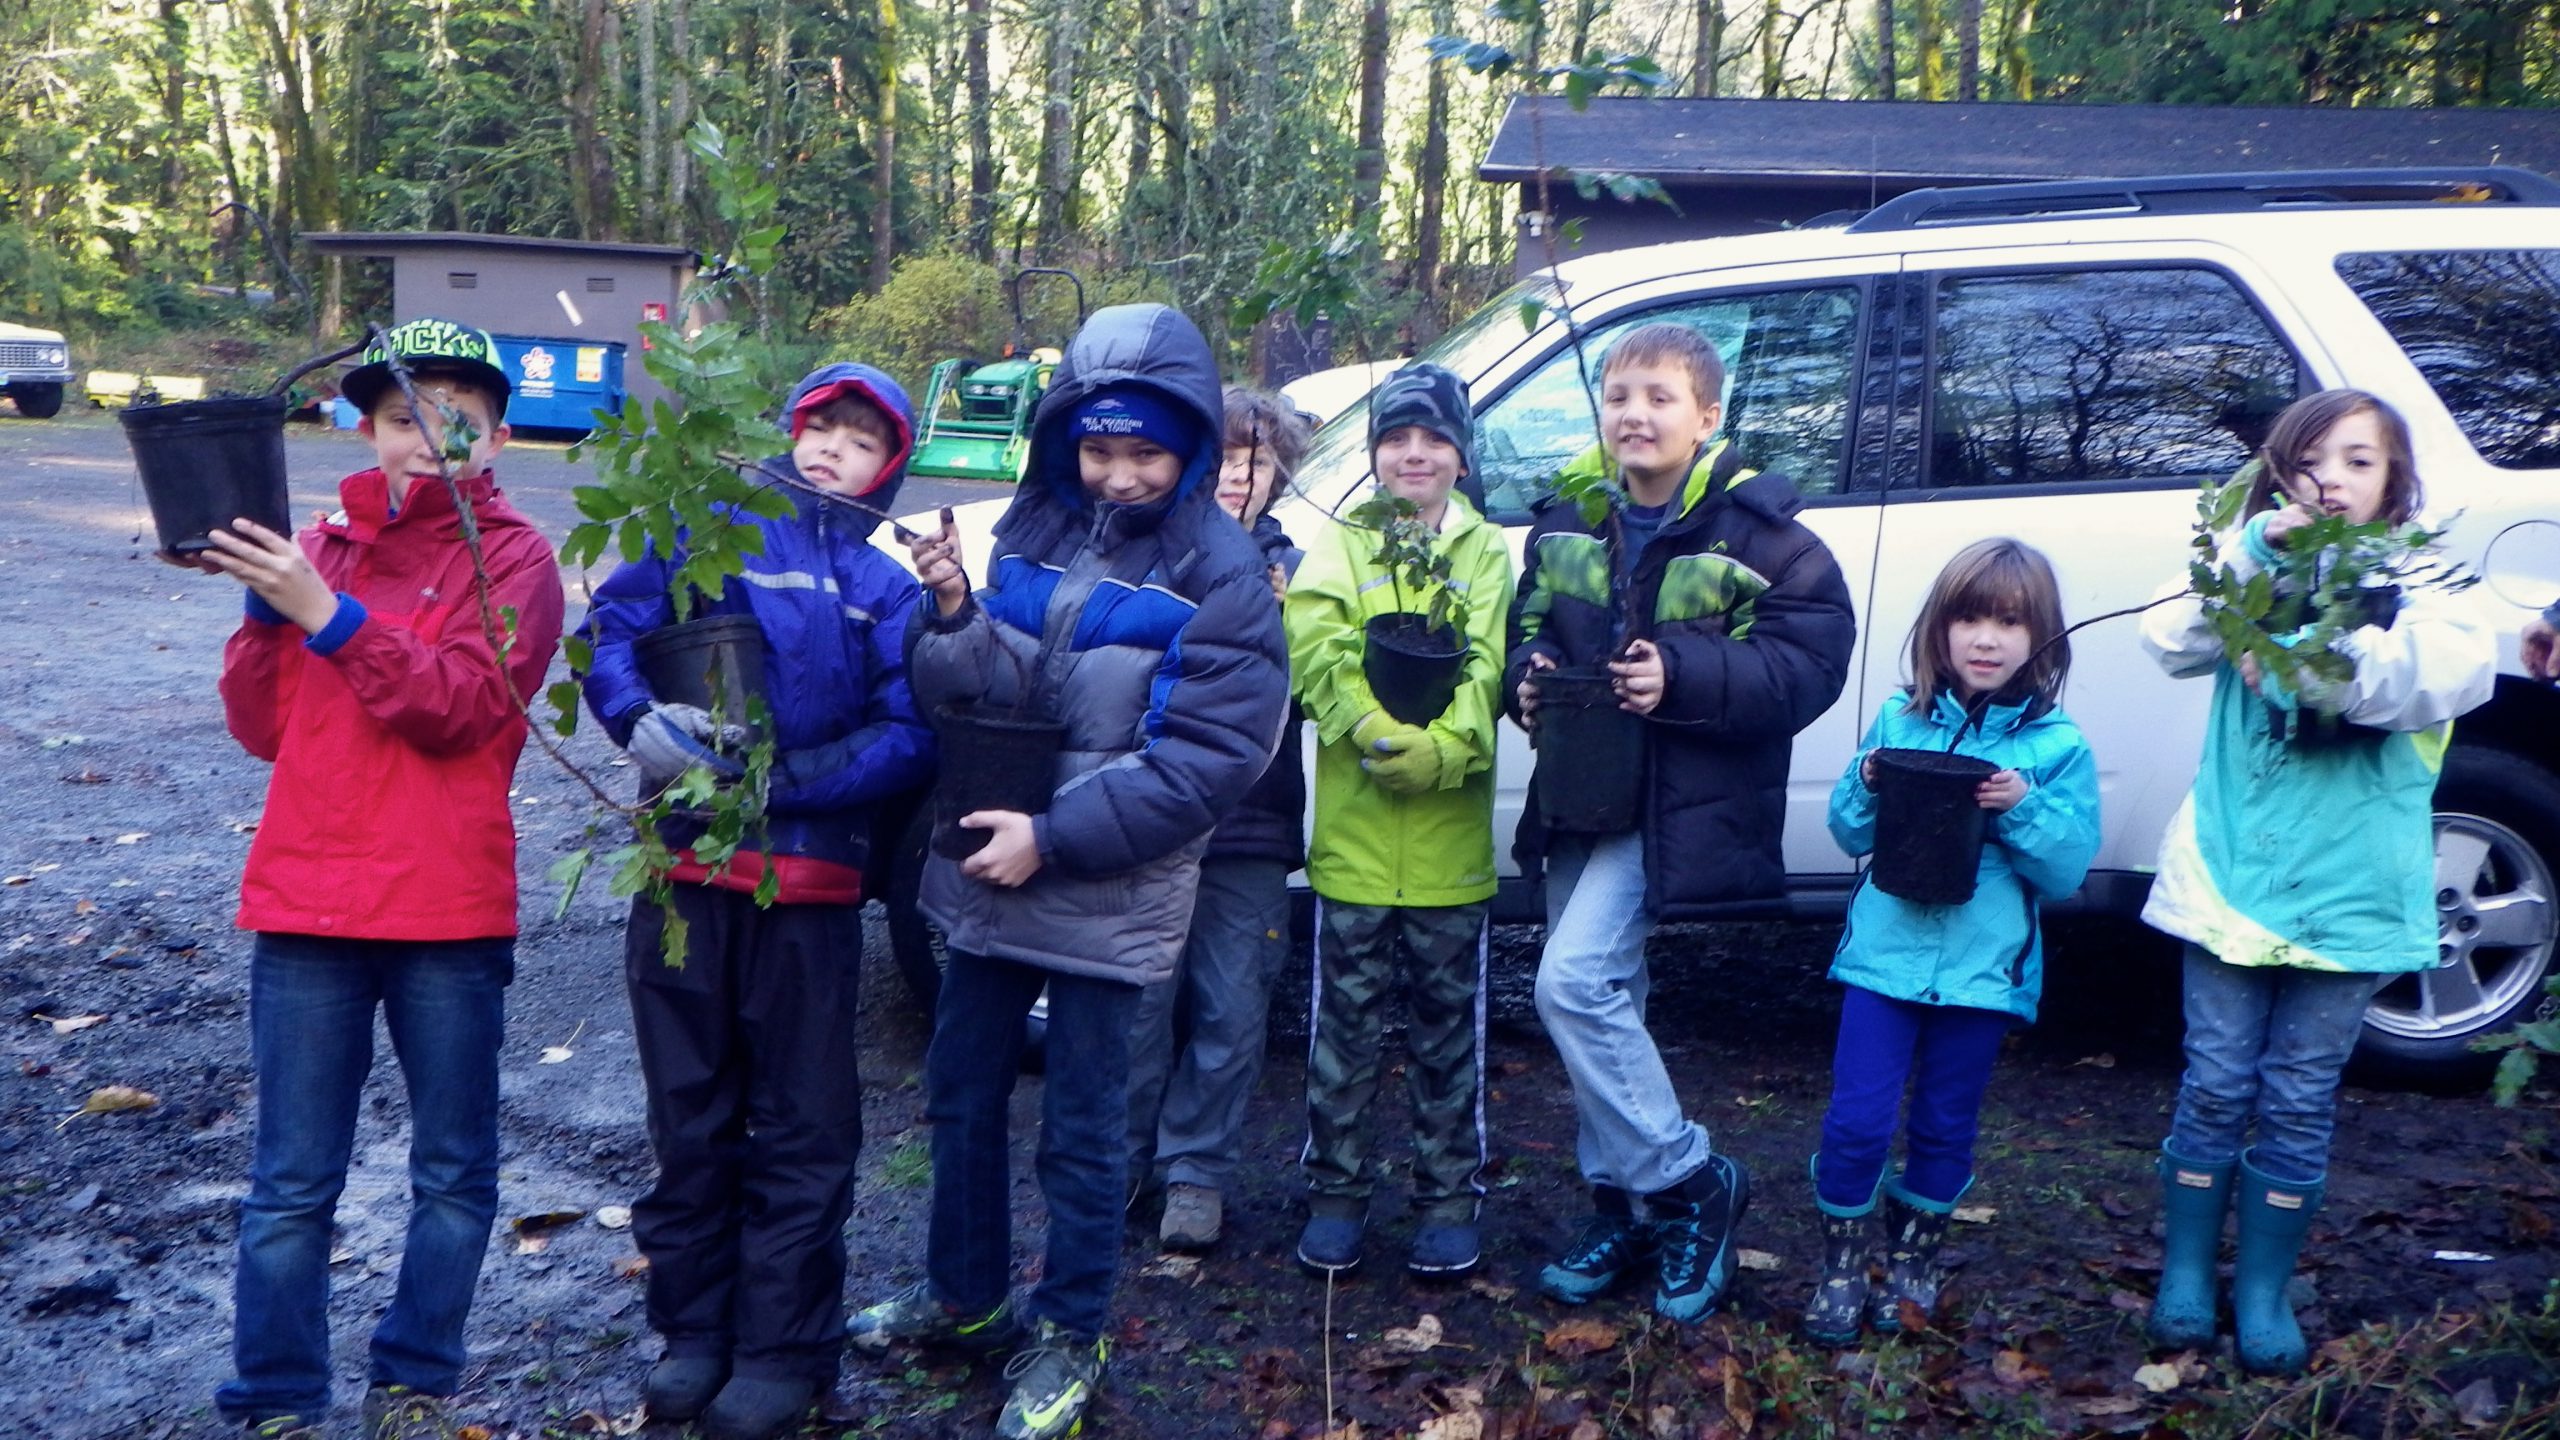 Group of 8 children outdoors wearing jackets holding potted native plants.